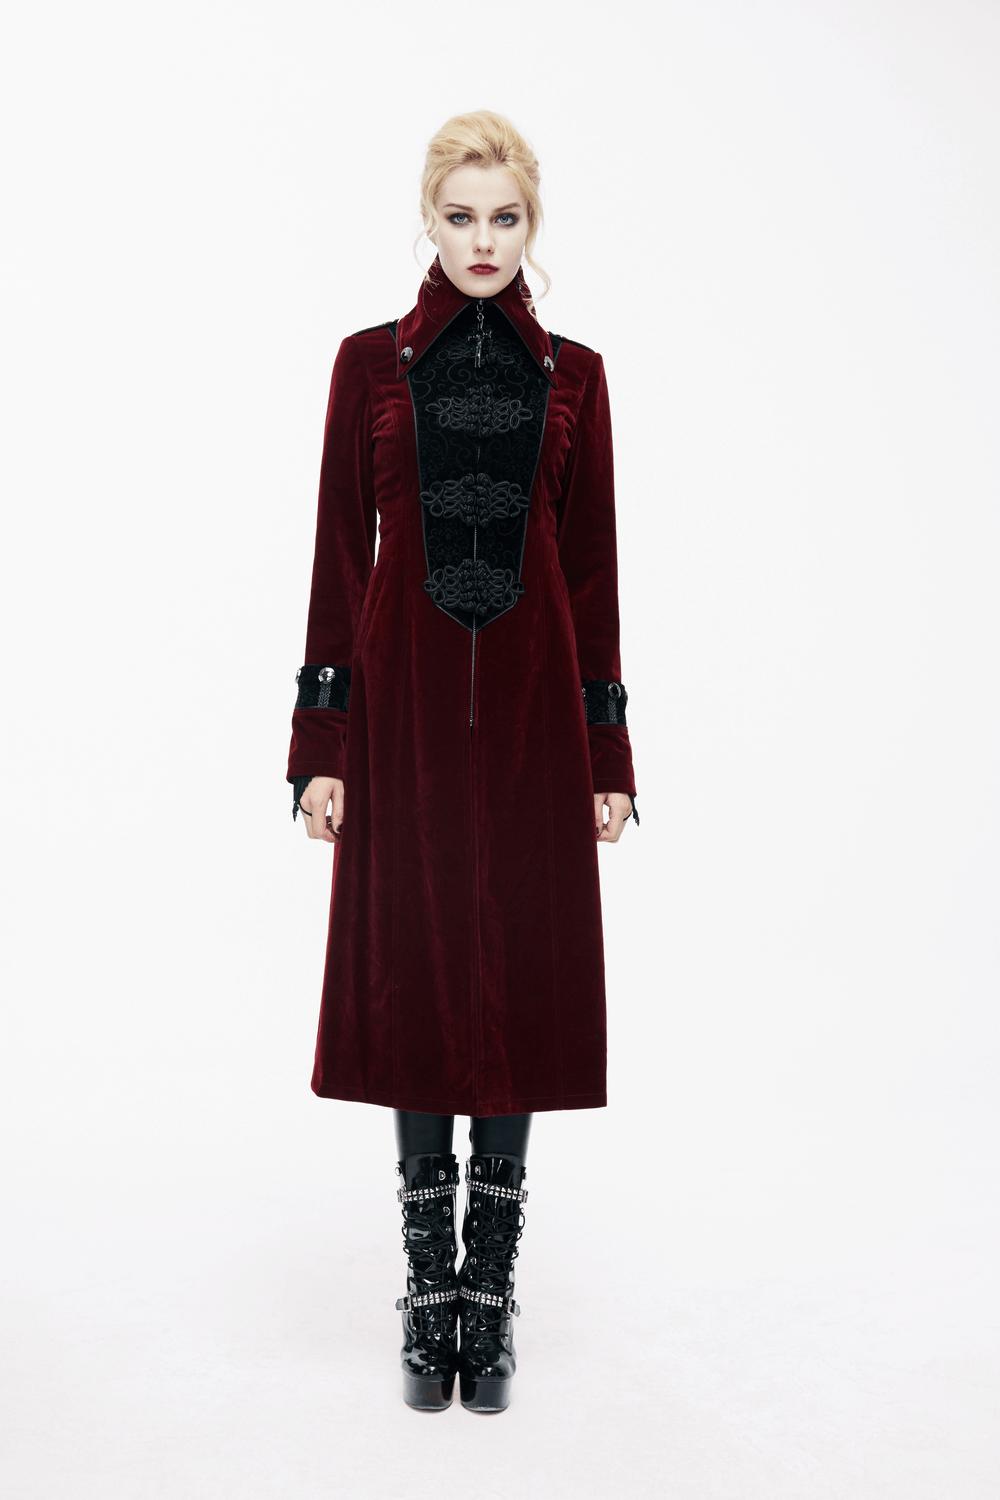 Women Embossed Long Red Coat In Gothic Style / High Collar Alternative Fashion Outerwear - HARD'N'HEAVY